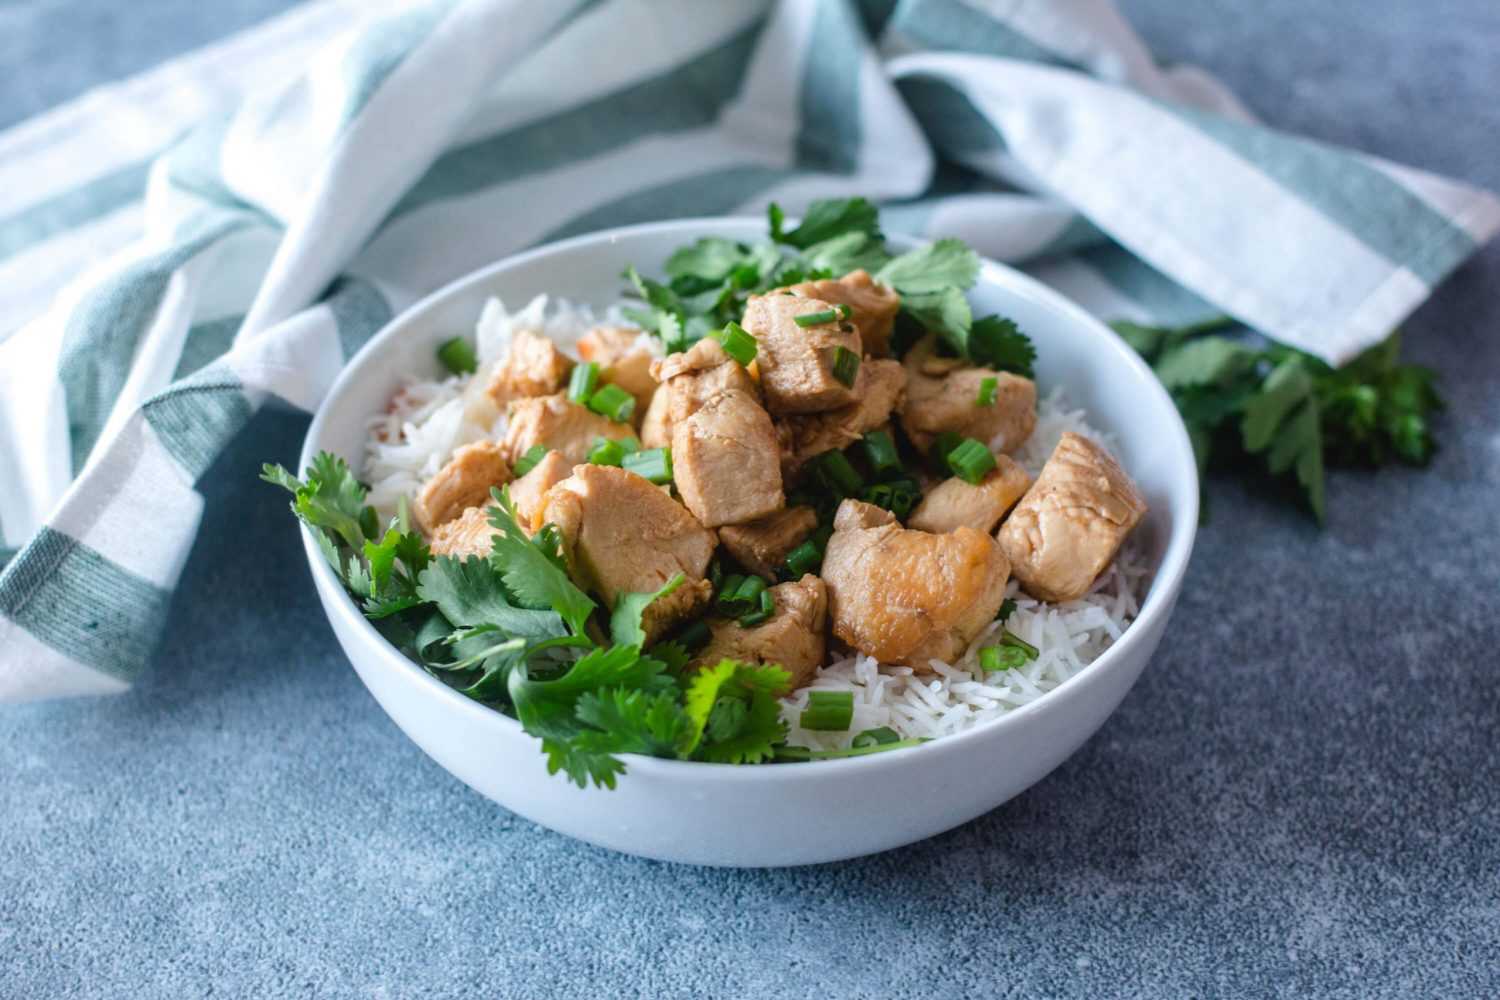 Chicken cubes on jasmine rice topped with chopped parsley and scallion